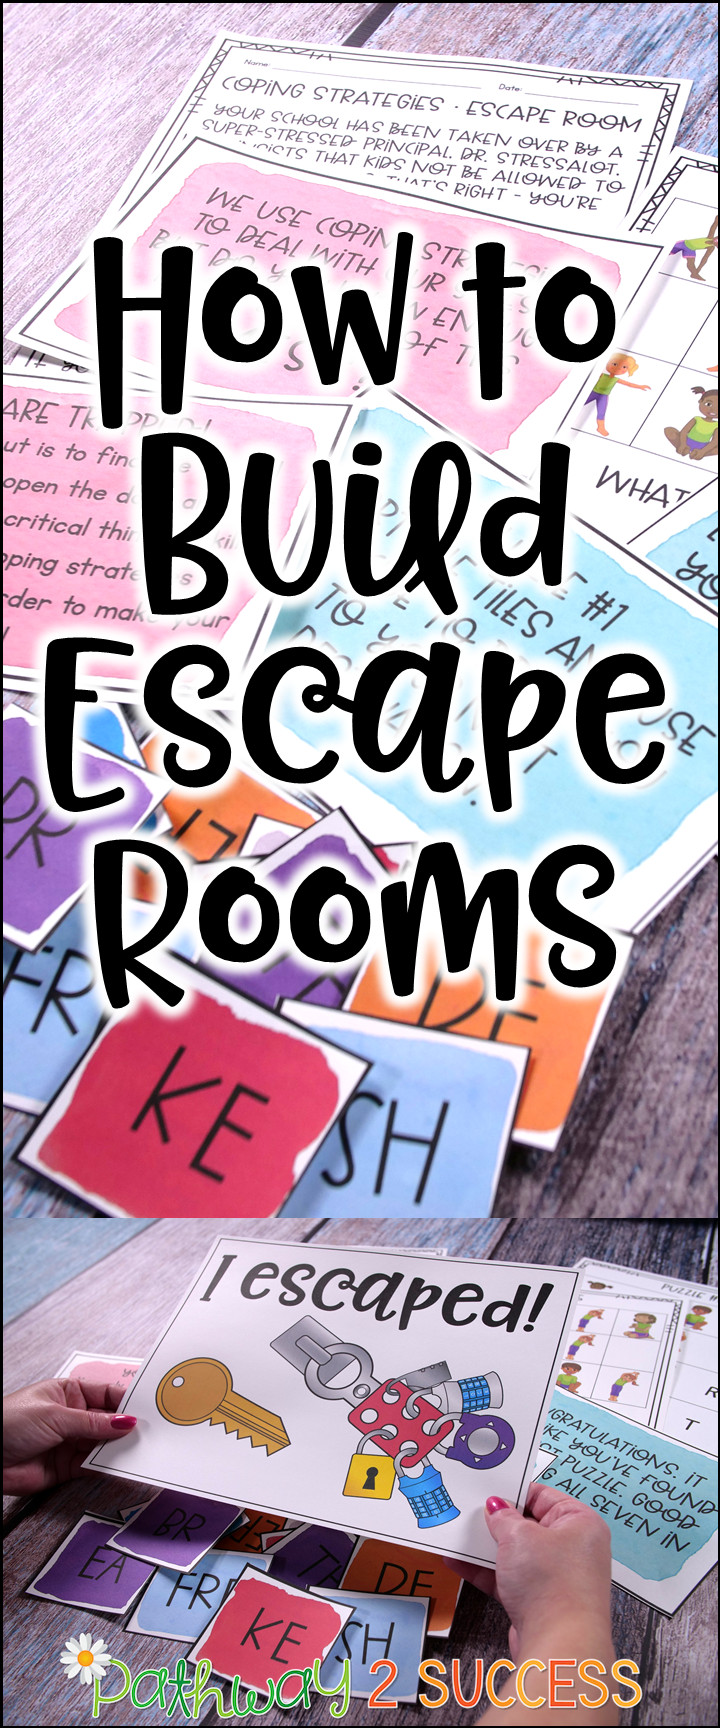 Escape Room Game For Kids
 How to Build Escape Room Challenges